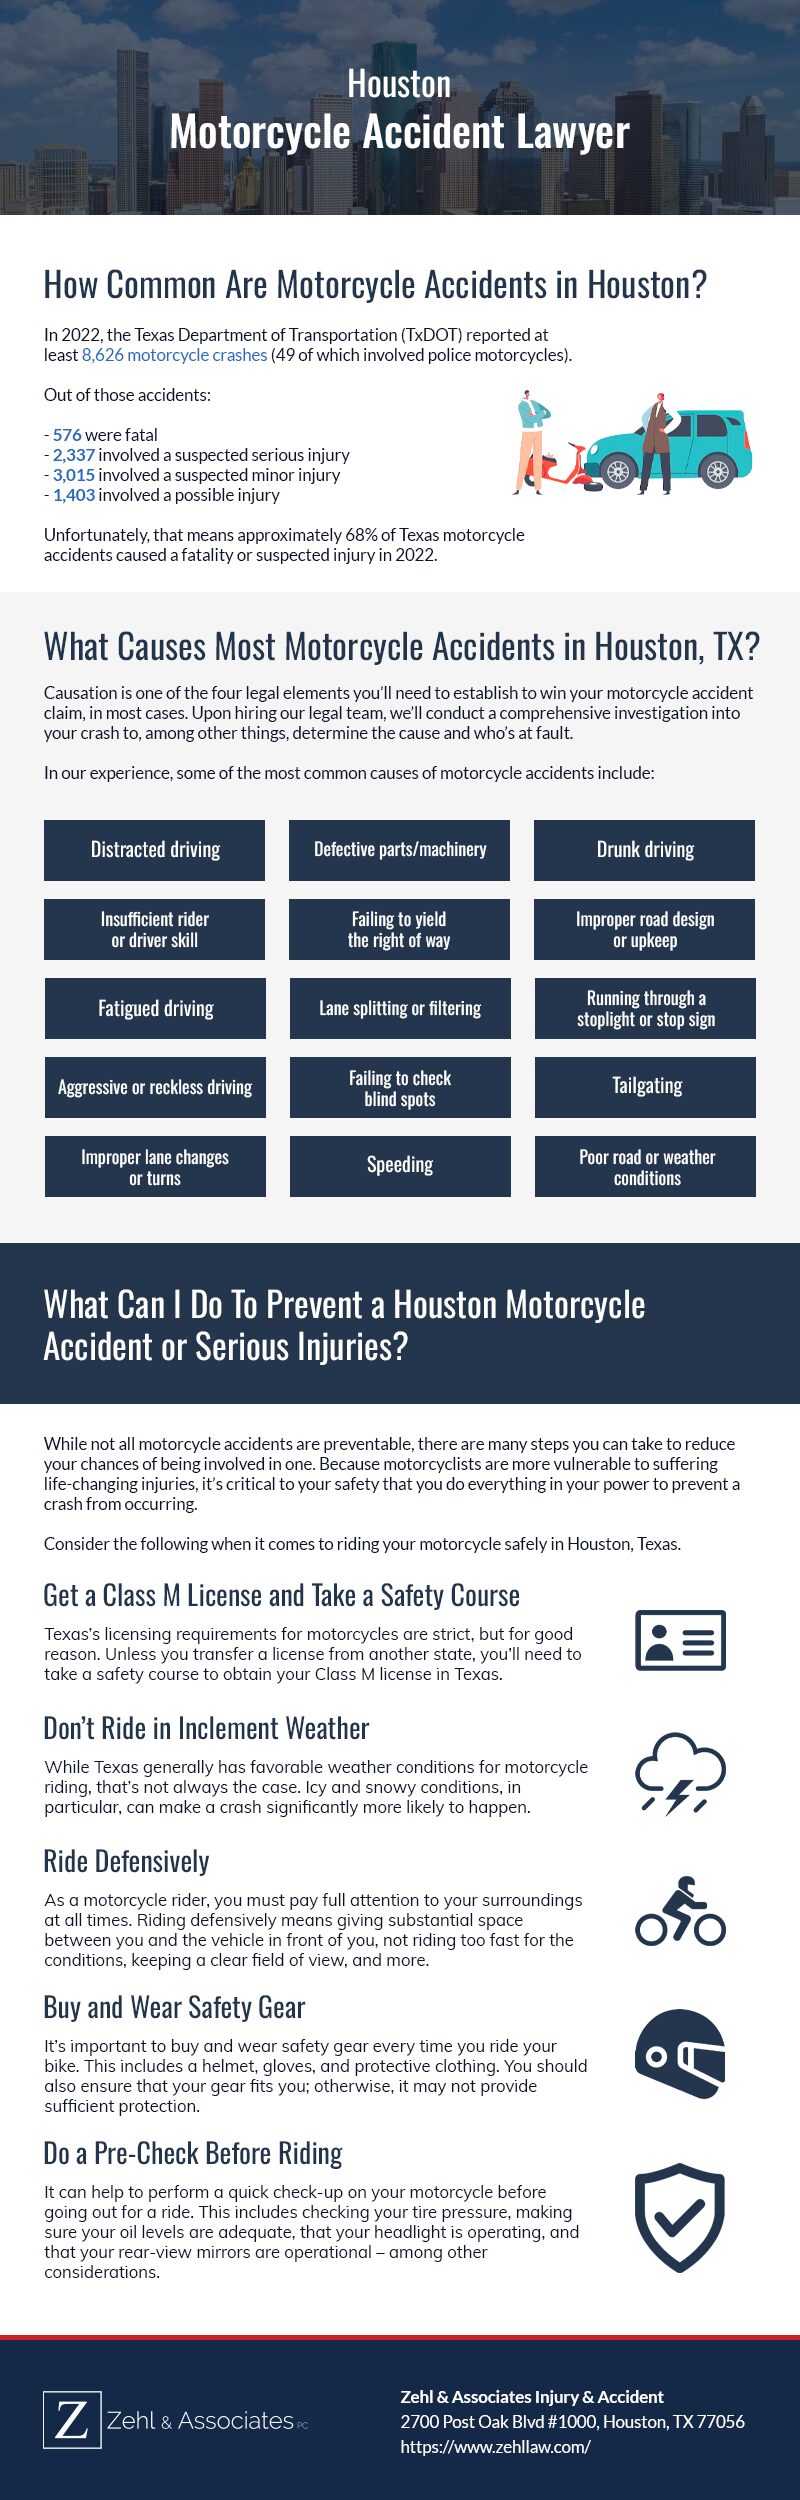 Motorcycle Accident Infographic